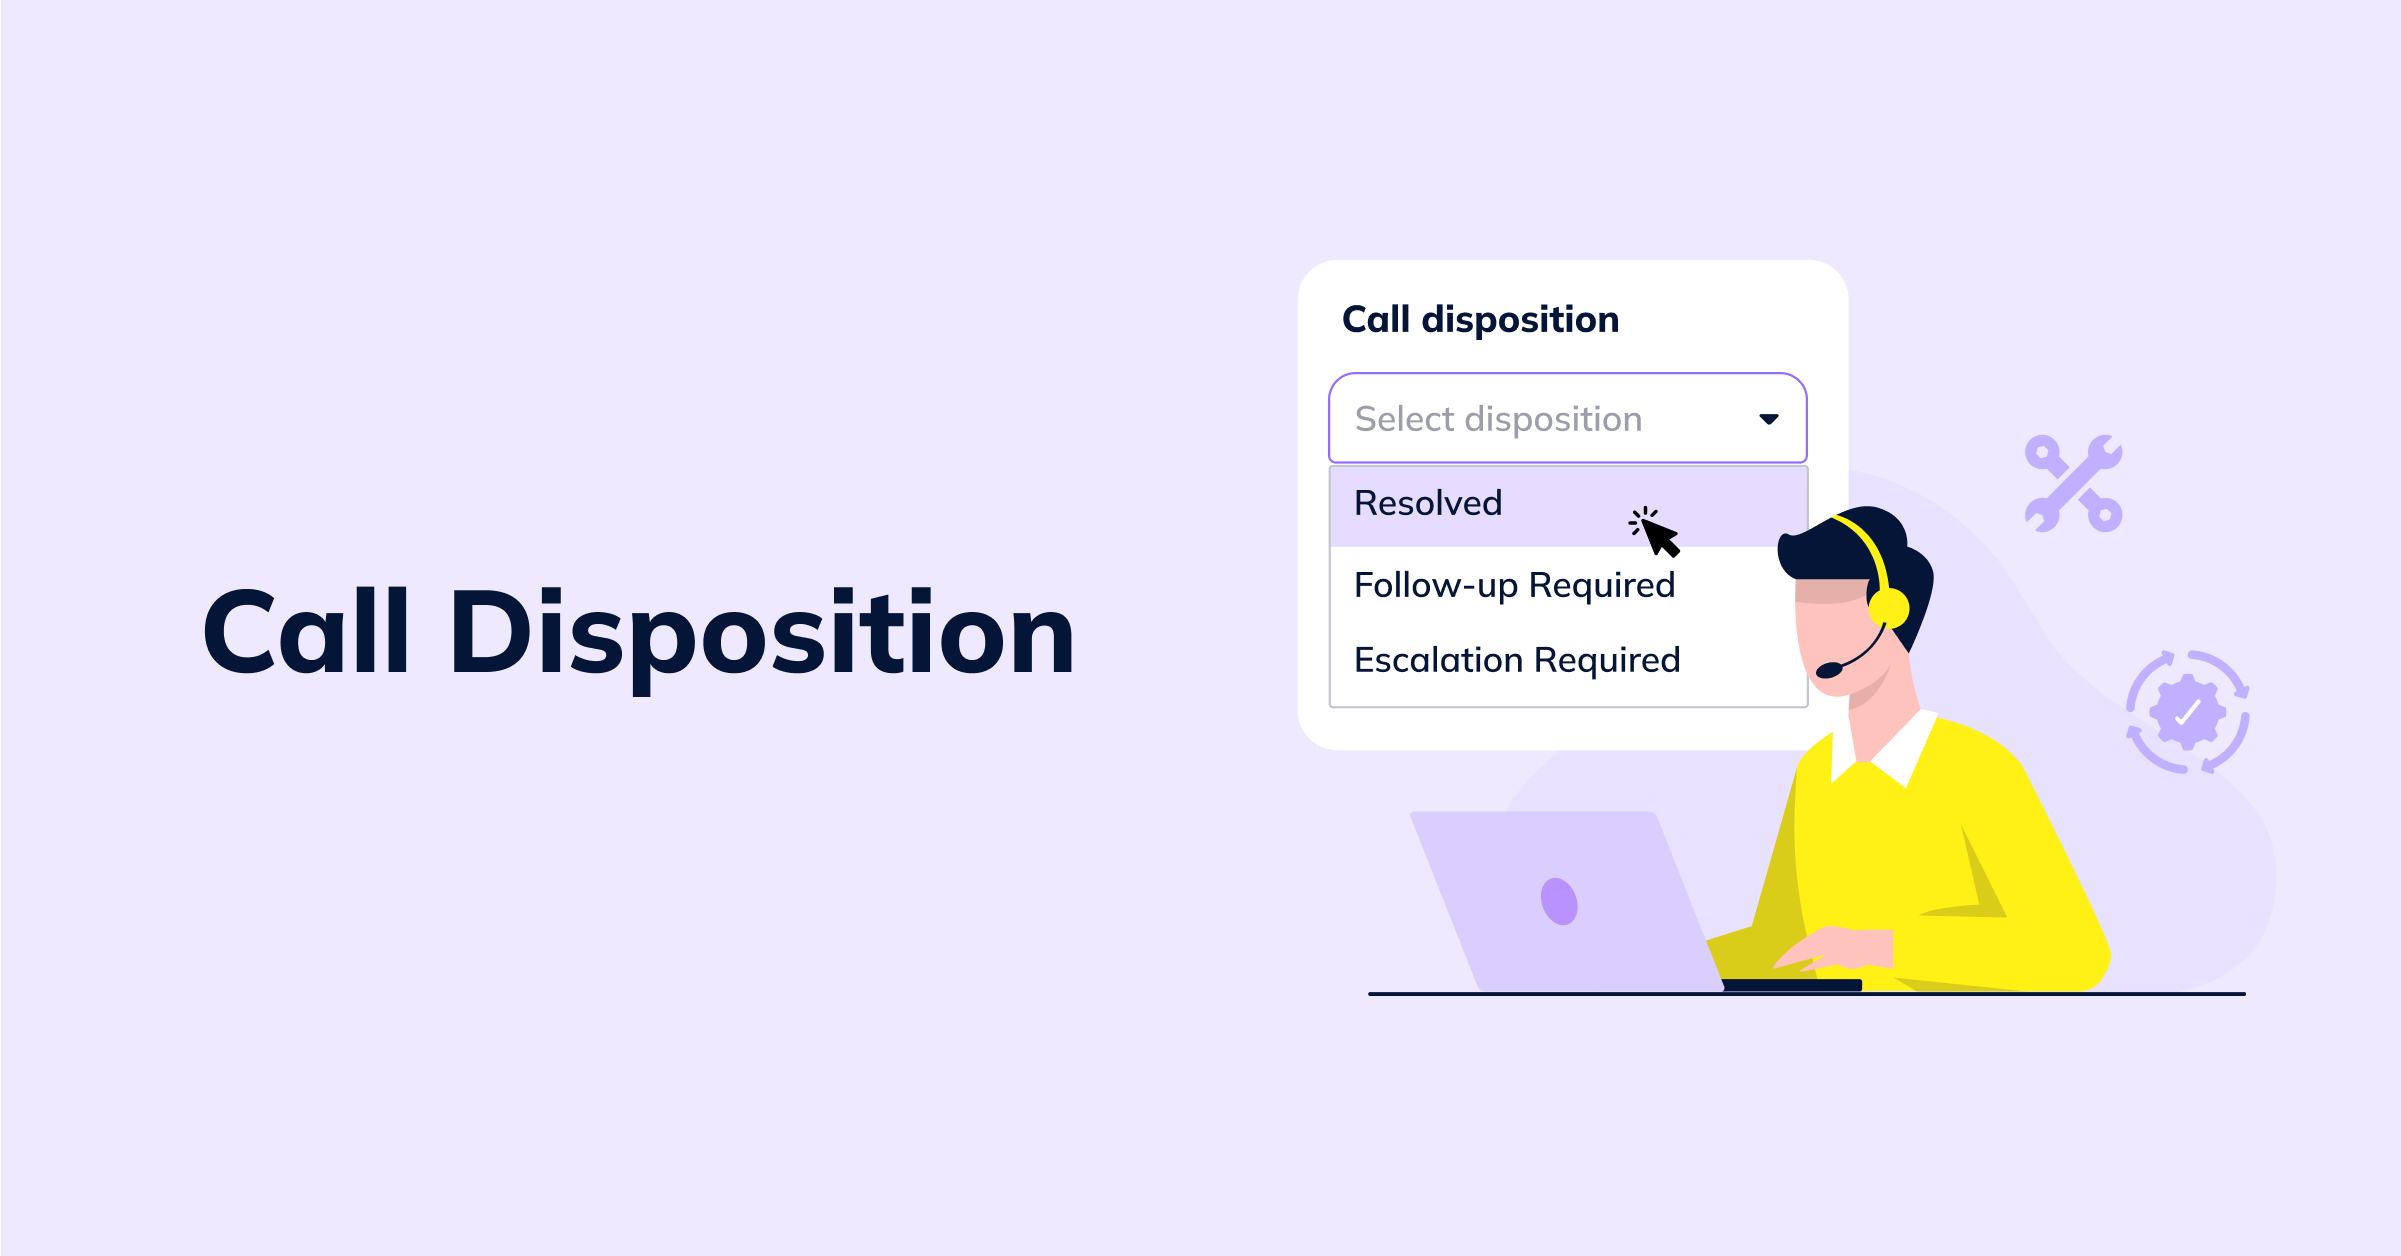 What is call disposition?